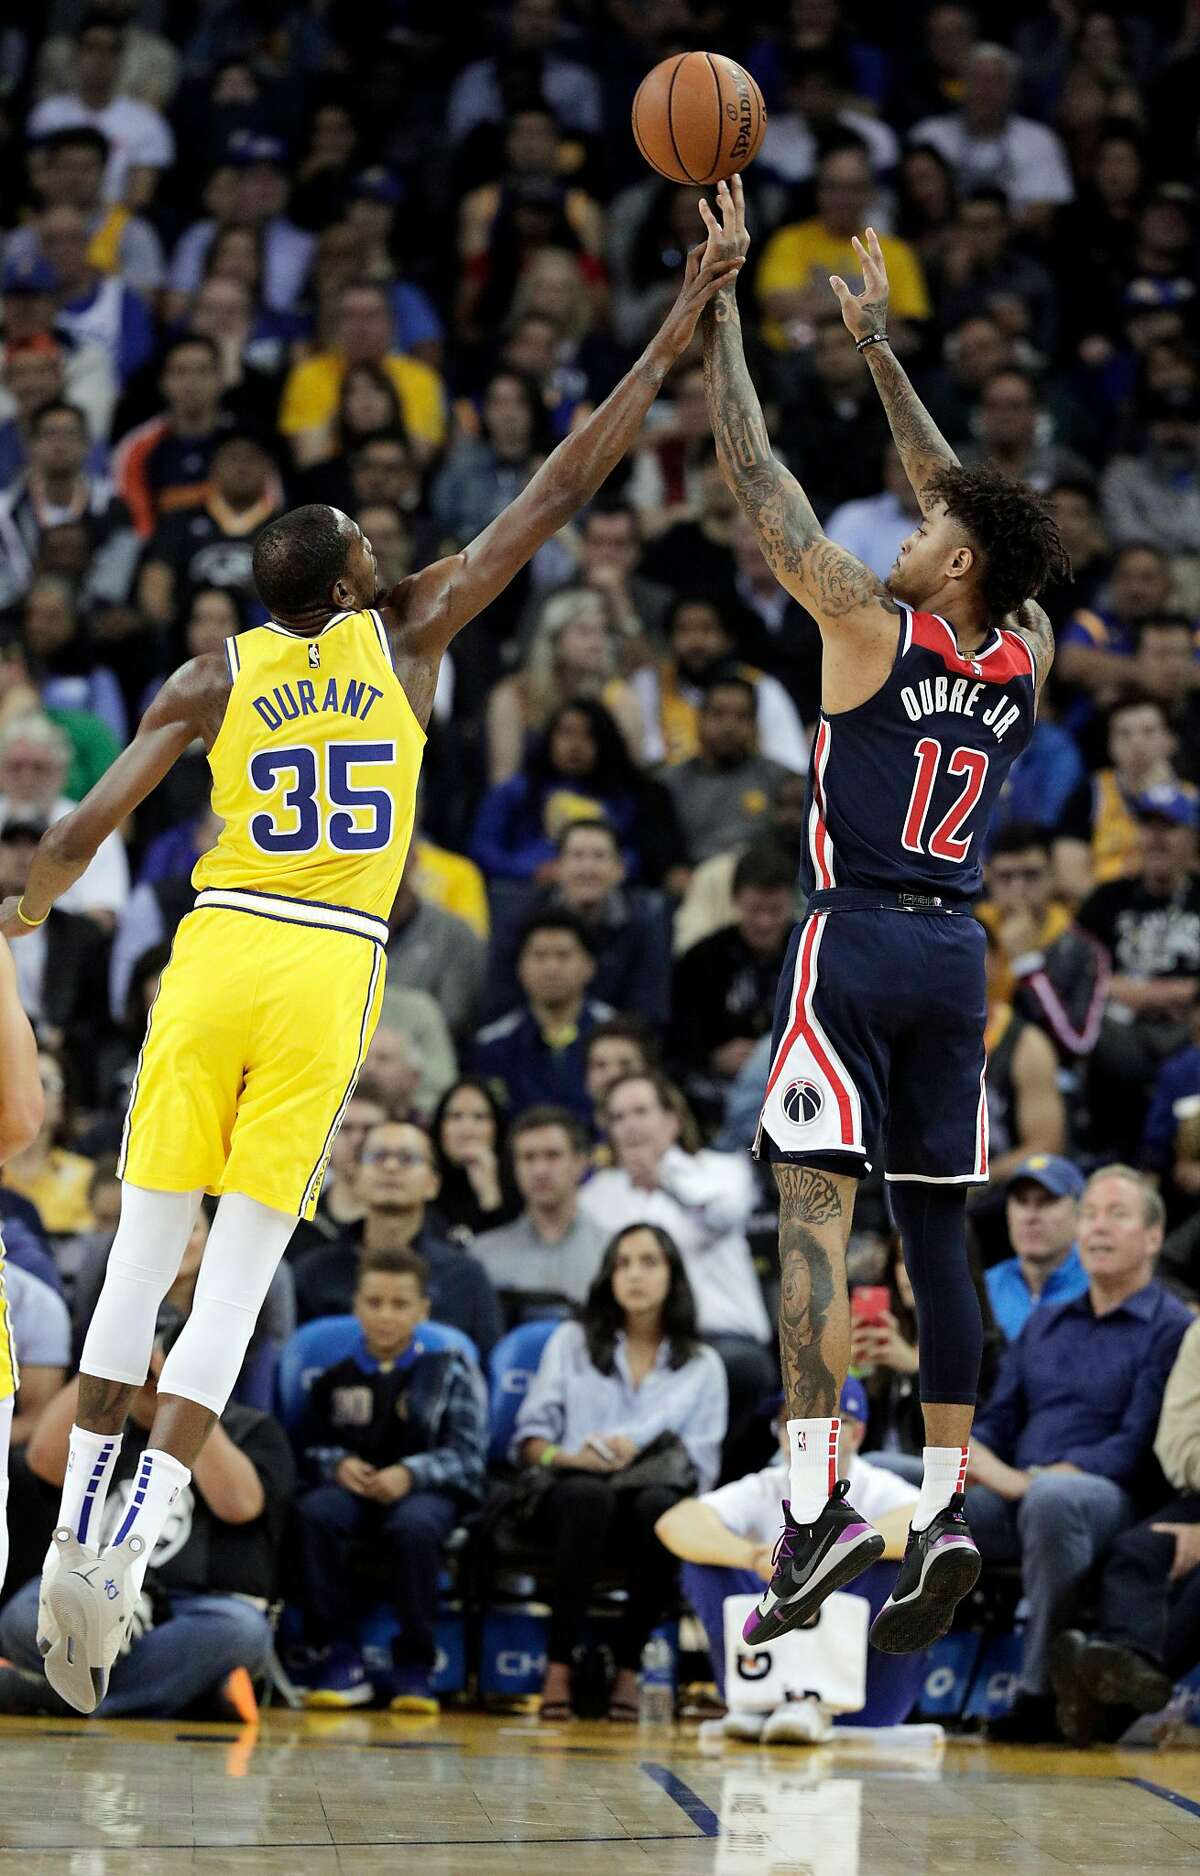 Kevin Durant (35) tries to block a shot by Kelly Oubre Jr., (12) in the first half as the Golden State Warriors played the Washington Wizards at Oracle Arena in Oakland on Wednesday, Oct. 24, 2018. 